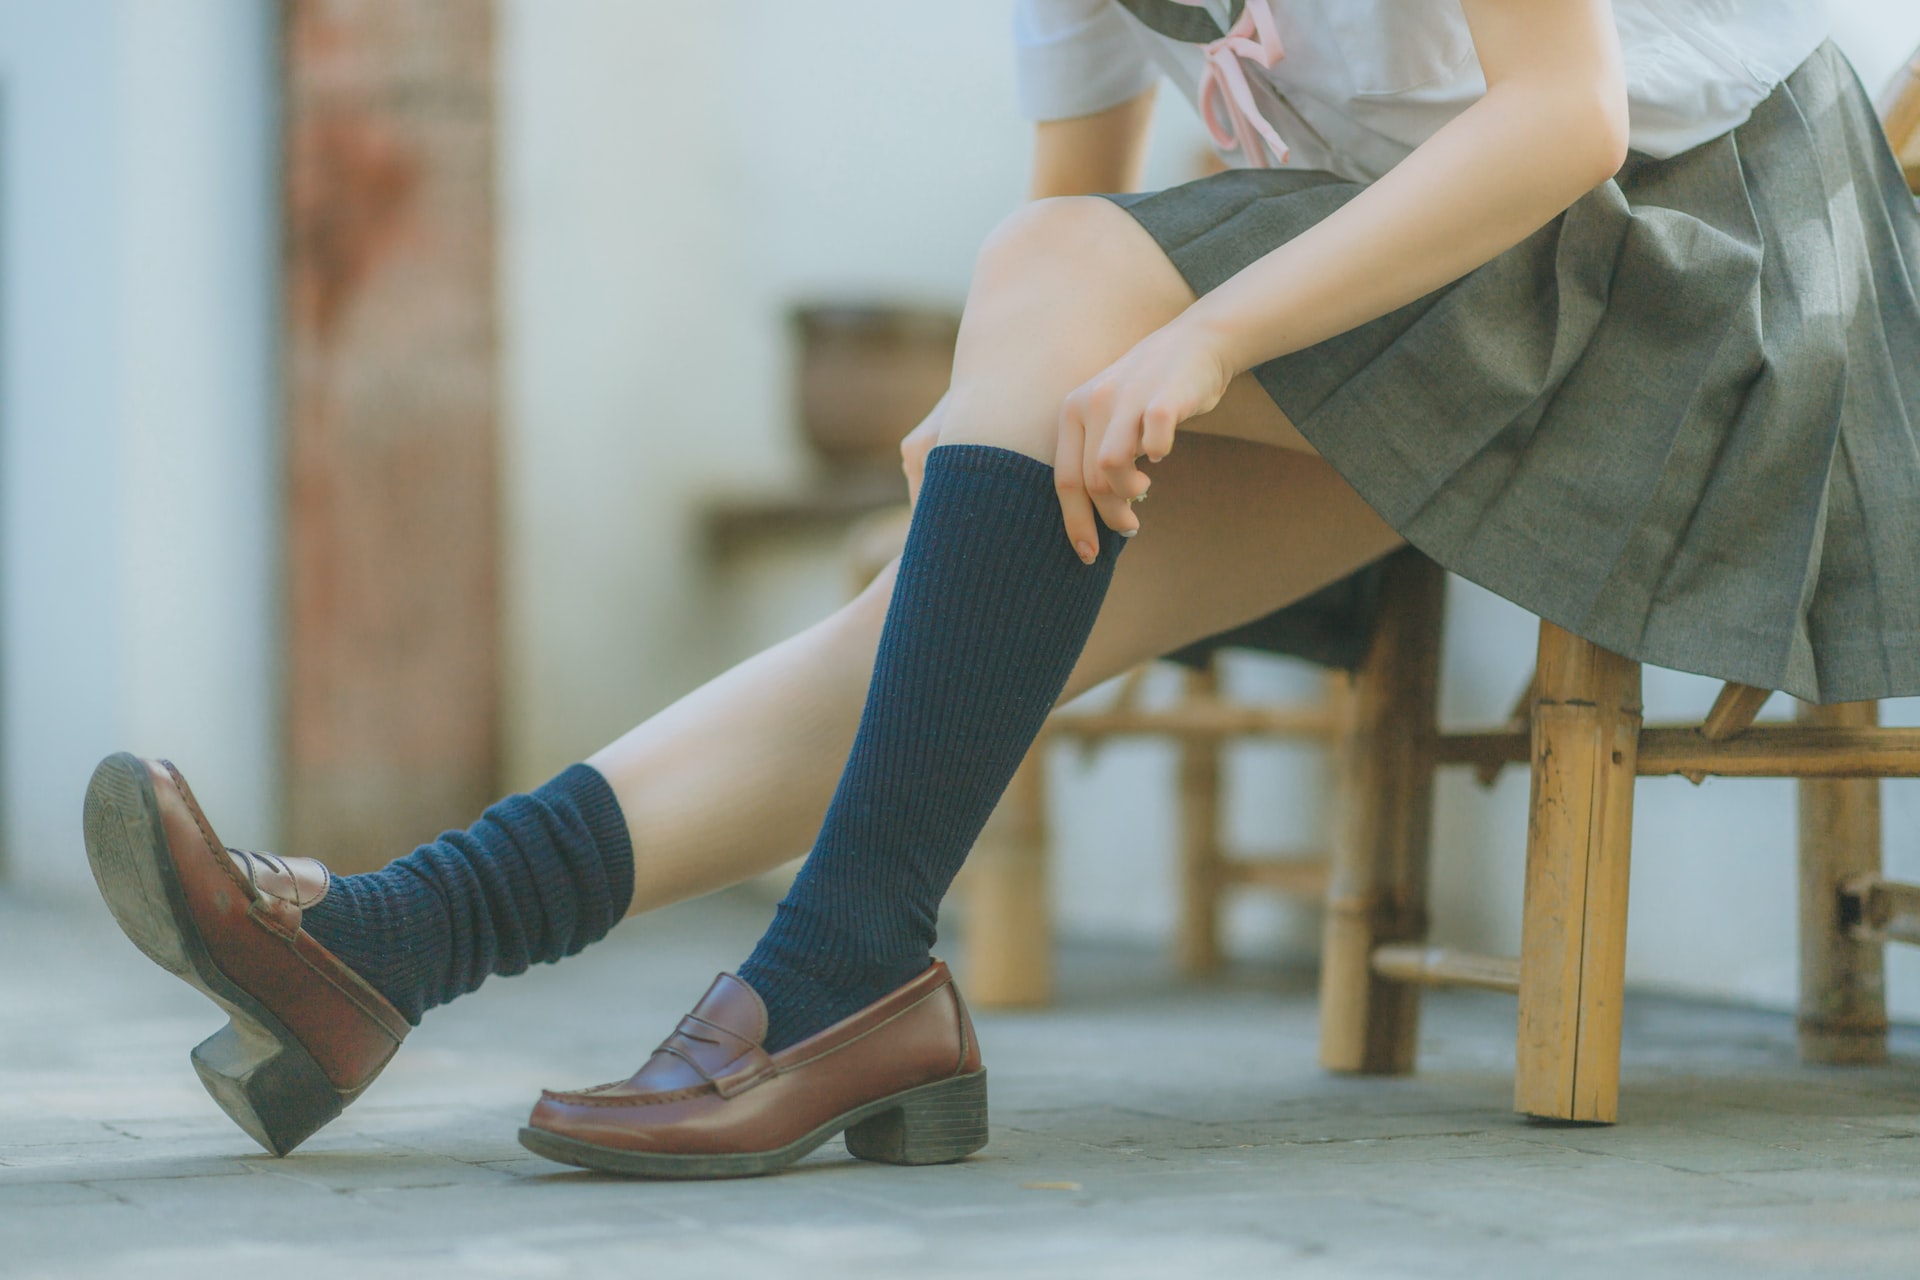 Fashion Meets Comfort: The Best Socks for Everyday Wear